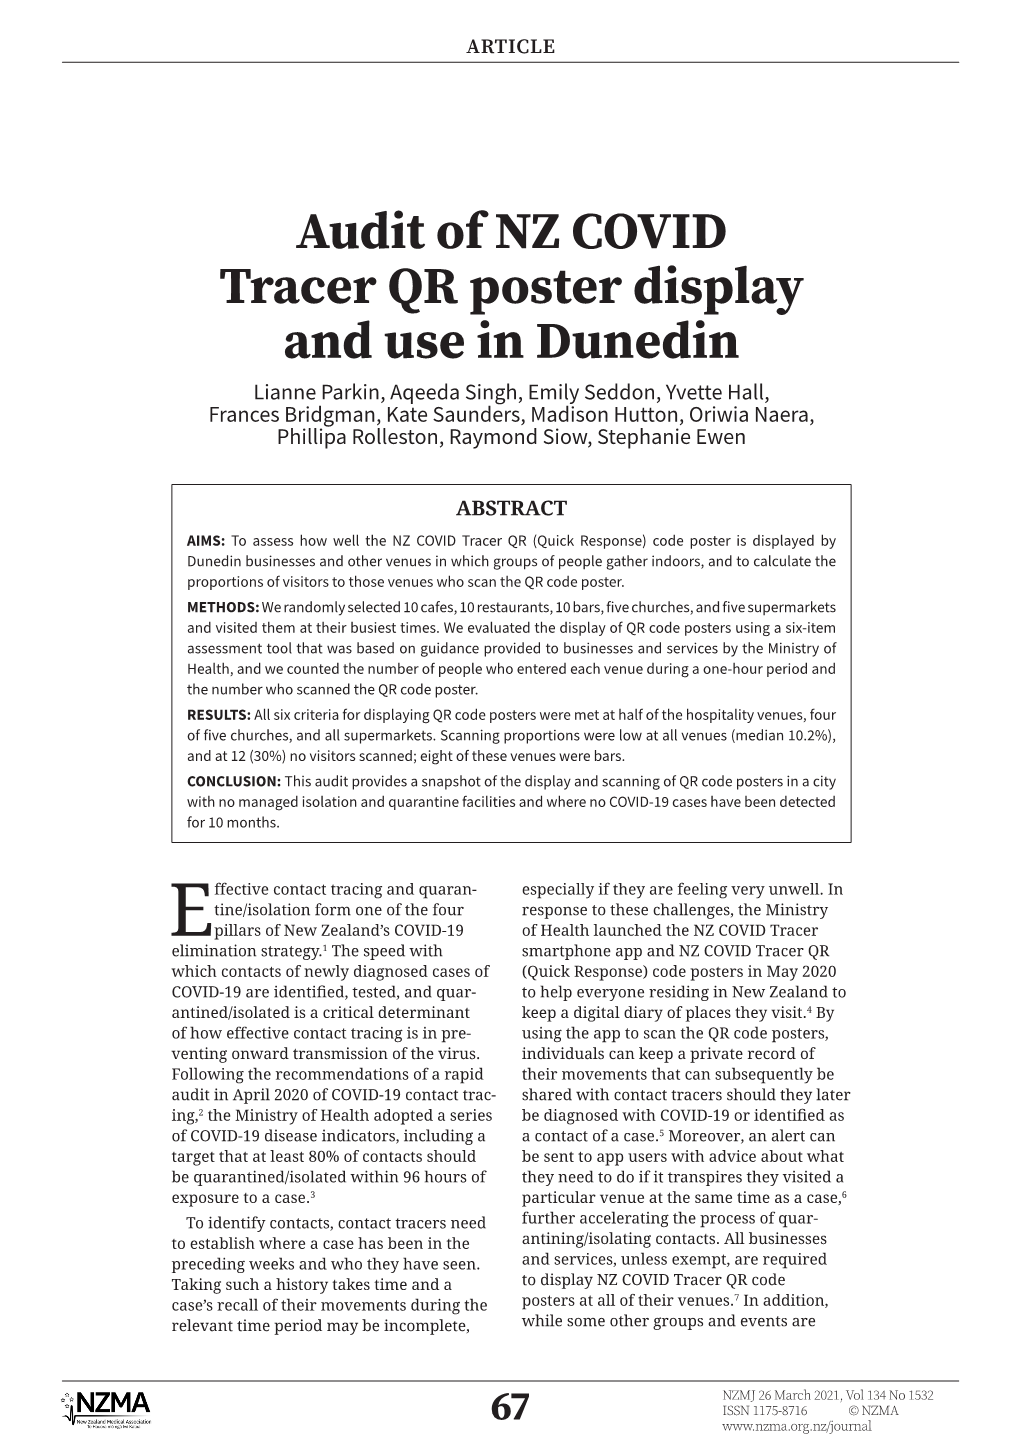 Audit of NZ COVID Tracer QR Poster Display and Use in Dunedin